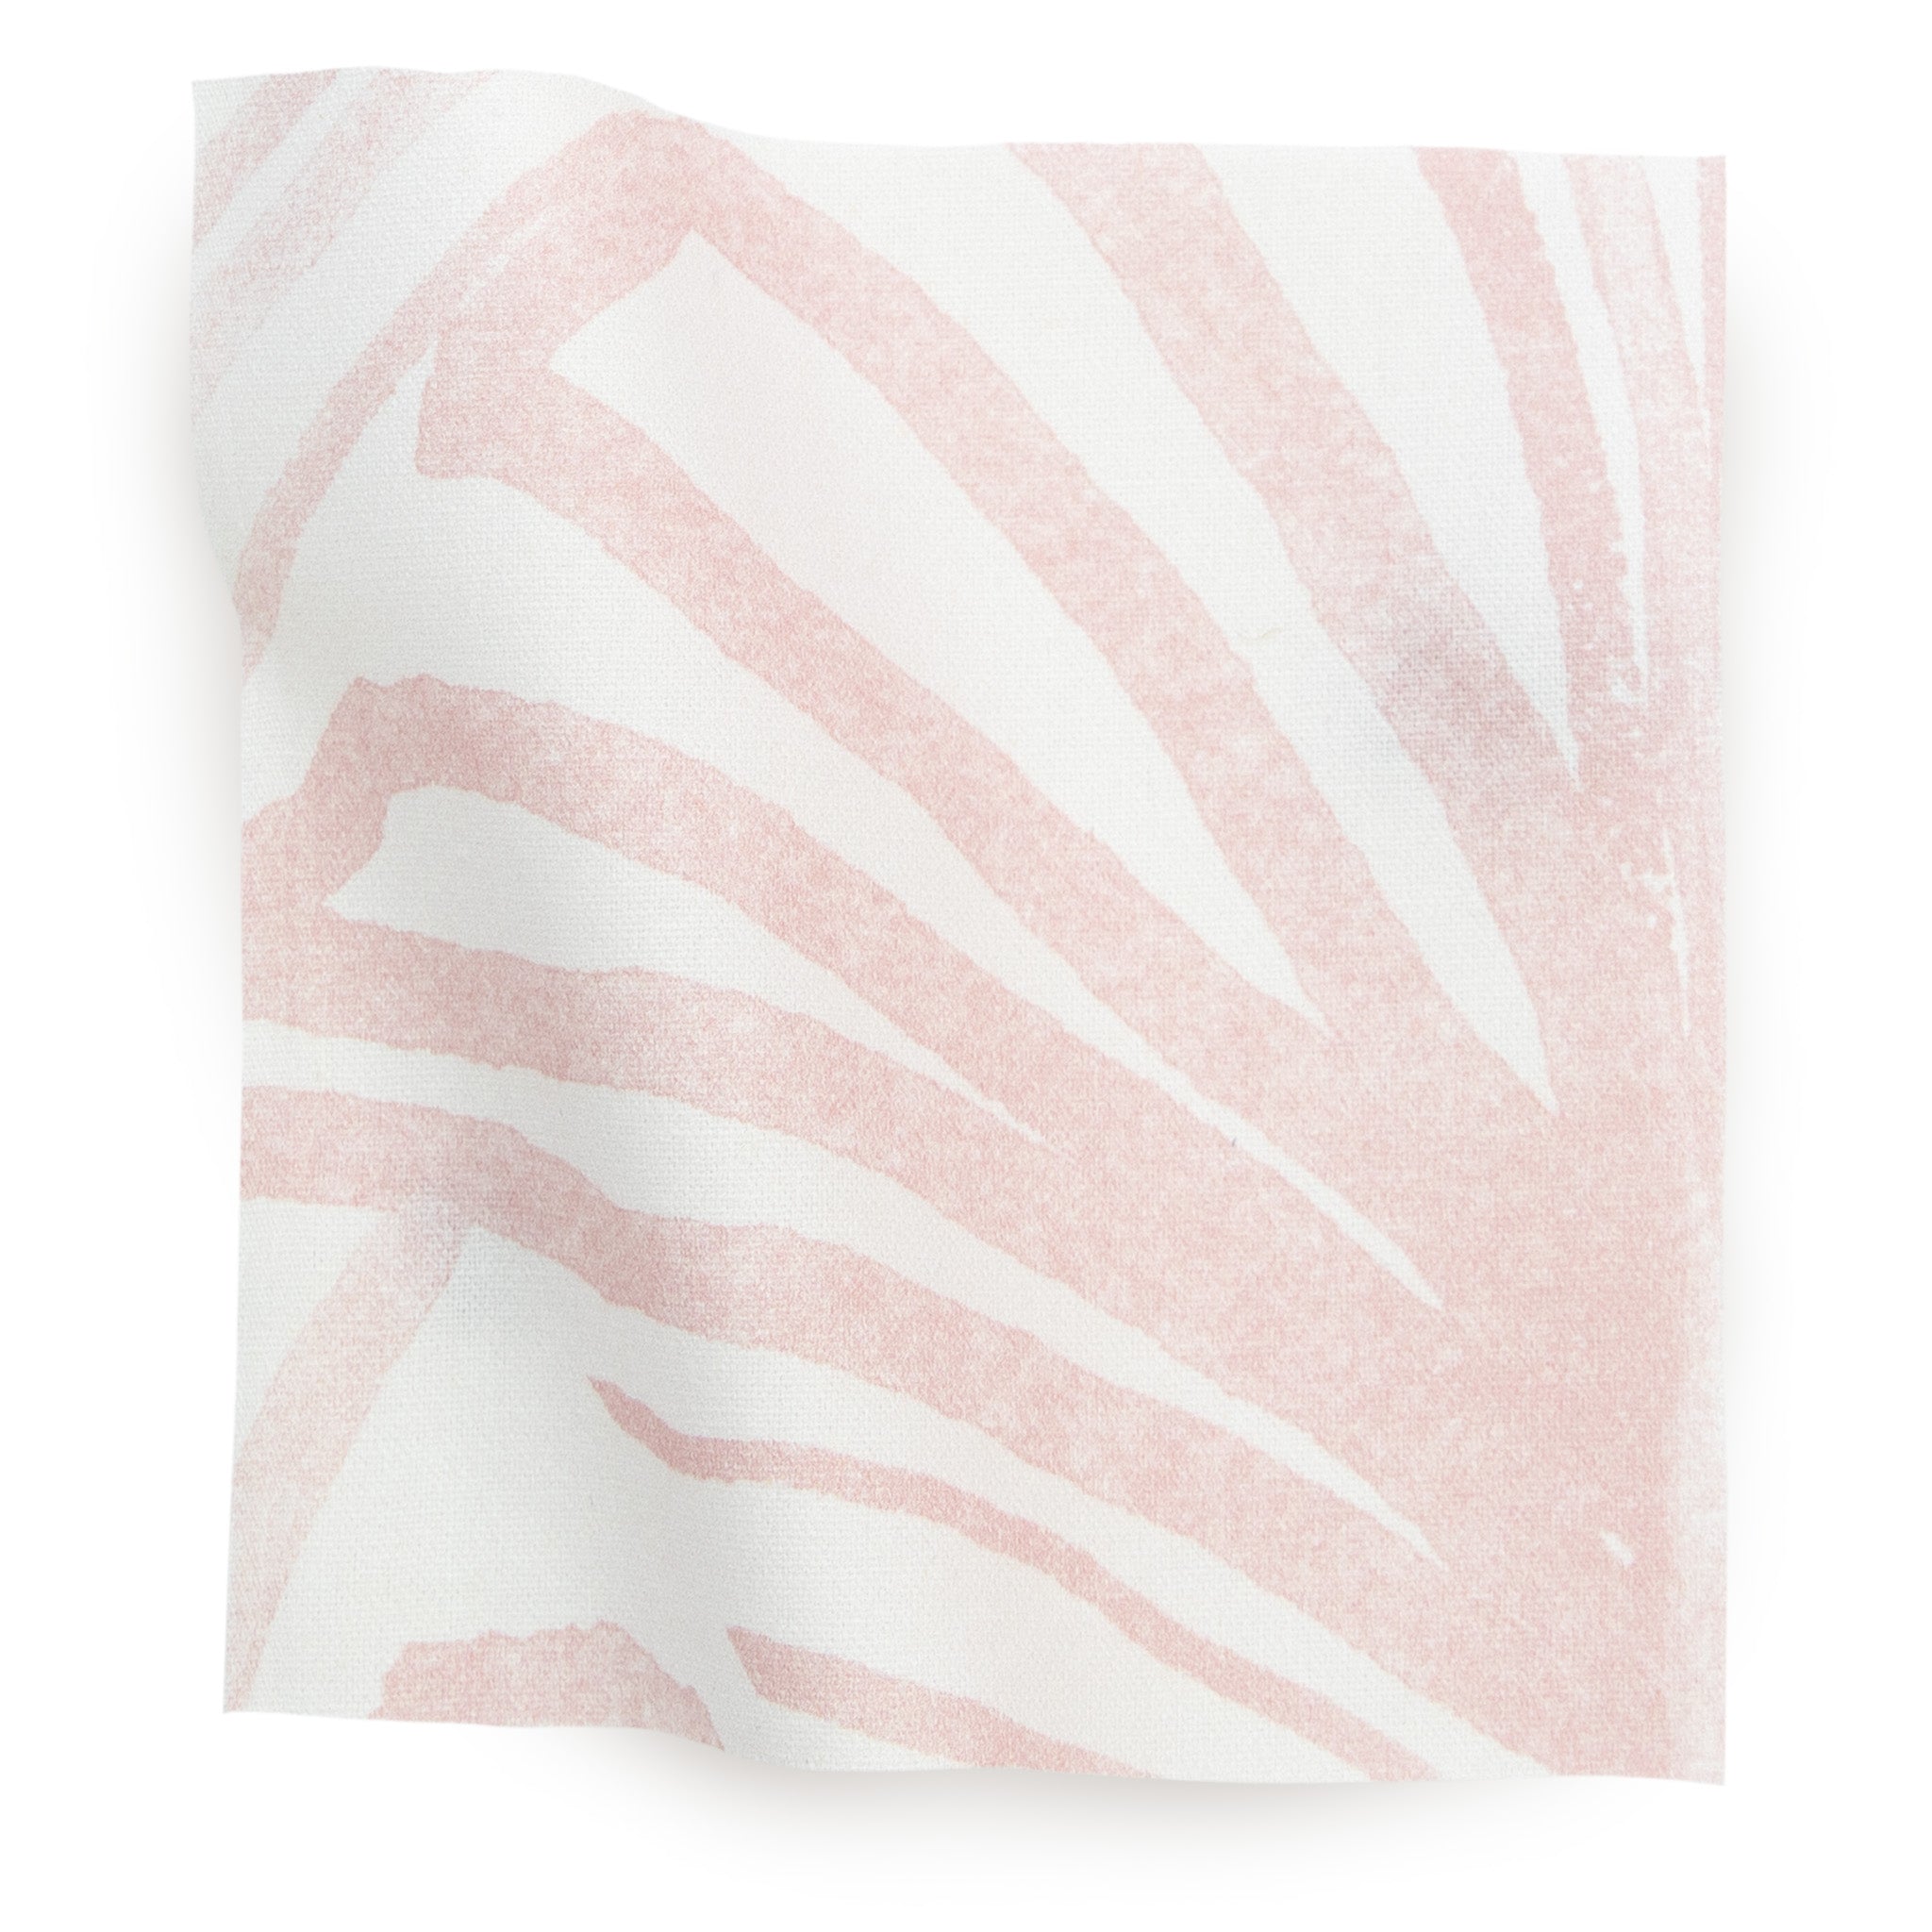 Rose Pink Palm Printed Cotton Swatch